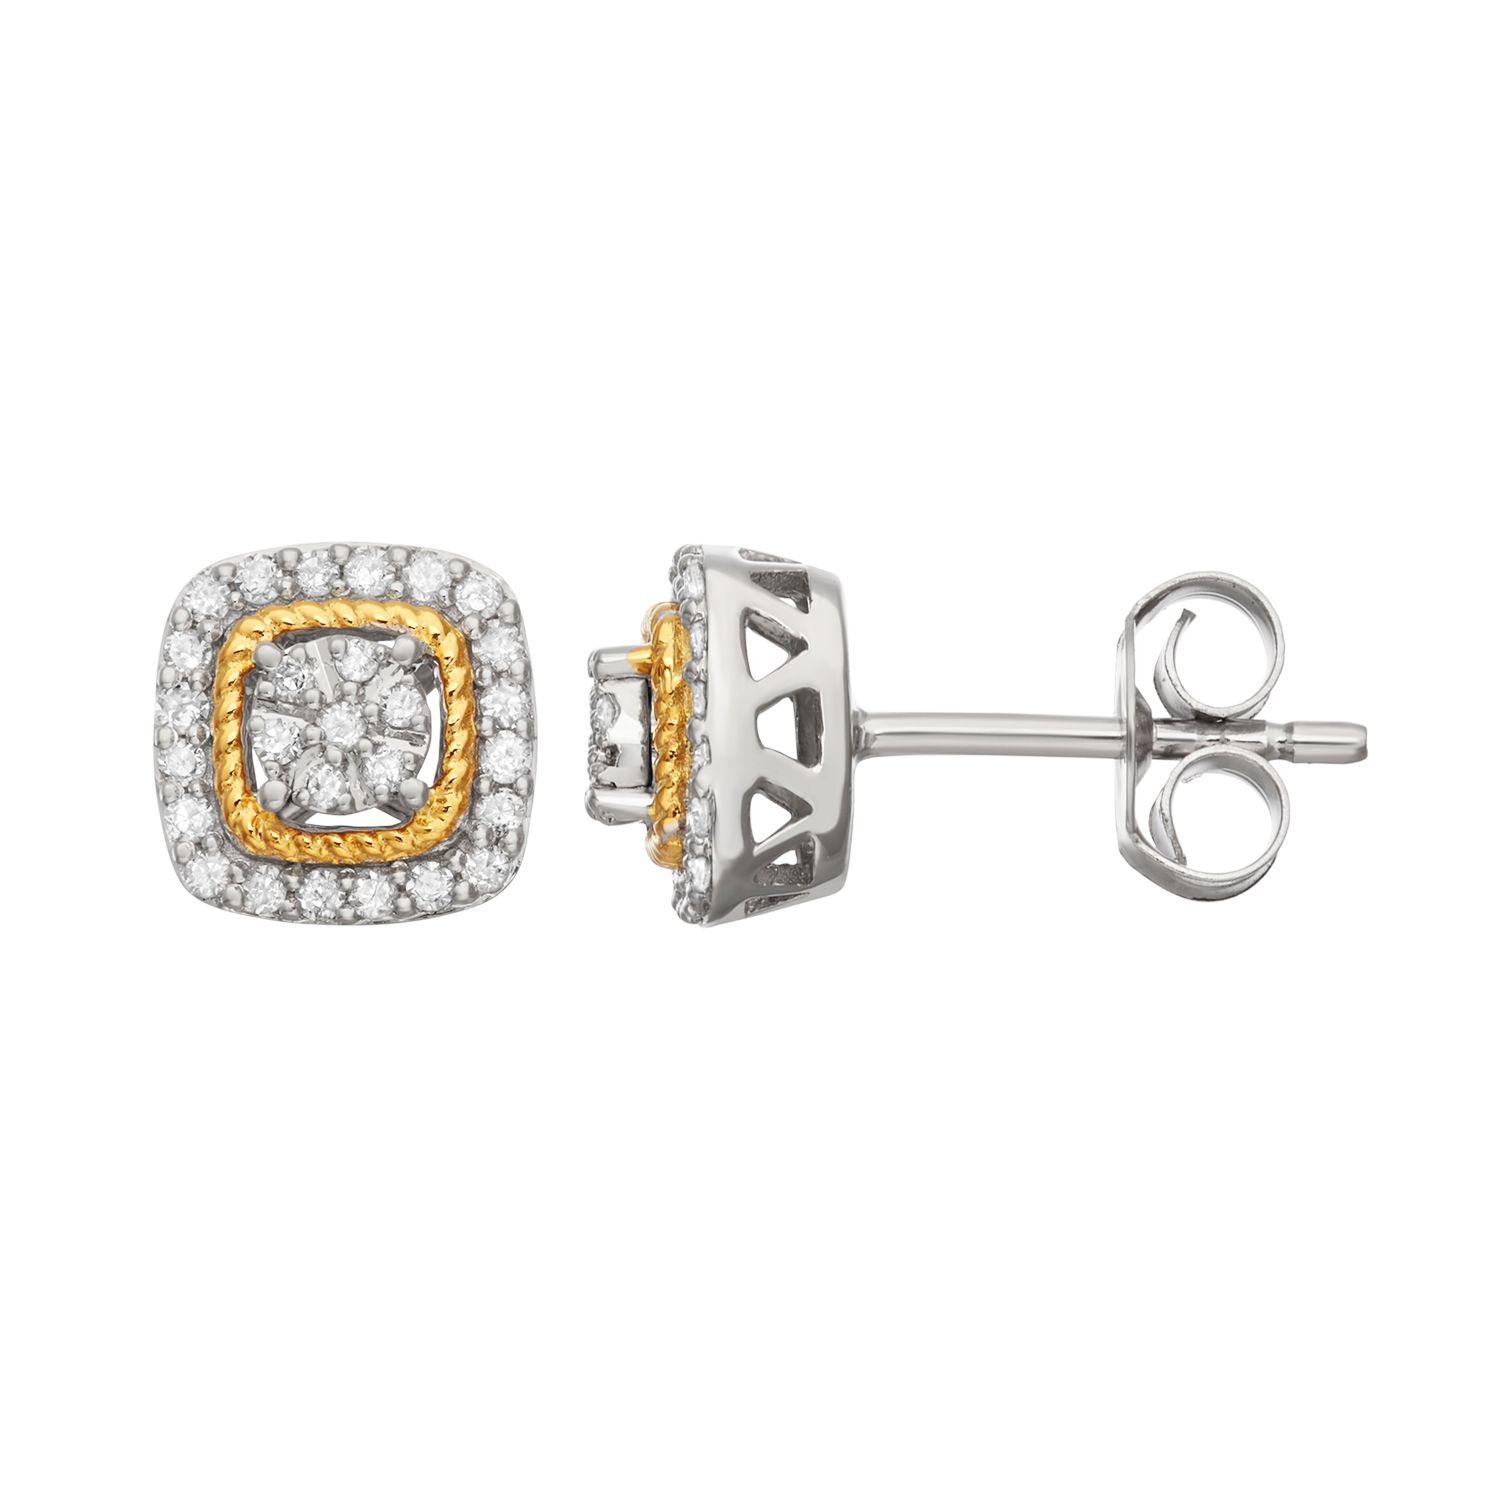 Image for HDI Two Tone Sterling Silver 1/4 Carat T.W. Diamond Square Halo Stud Earrings at Kohl's.